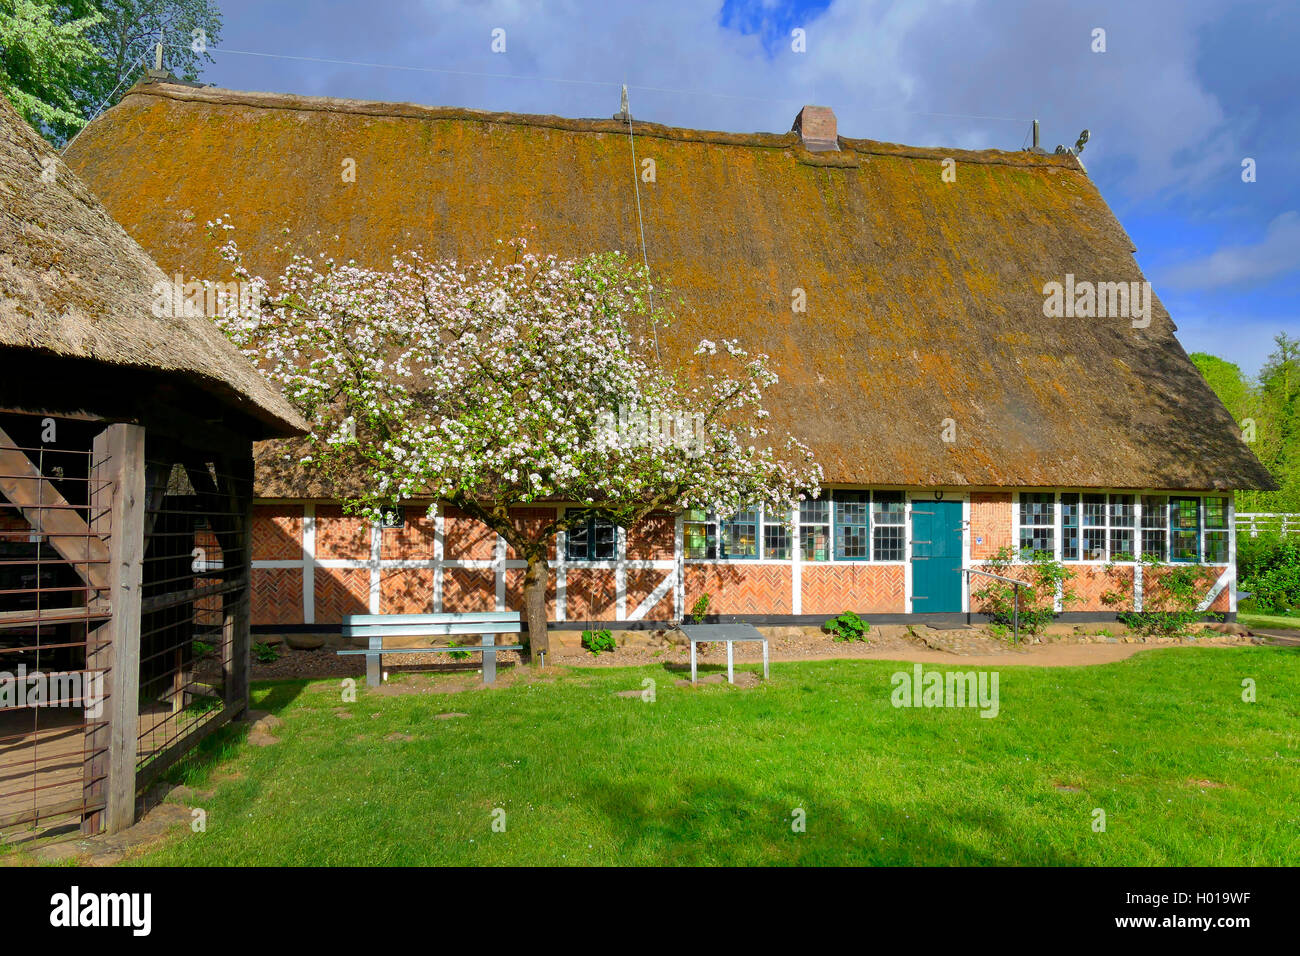 apple tree (Malus domestica), thatched-roof farm house and blooming apple tree, Germany, Lower Saxony, Stade Stock Photo